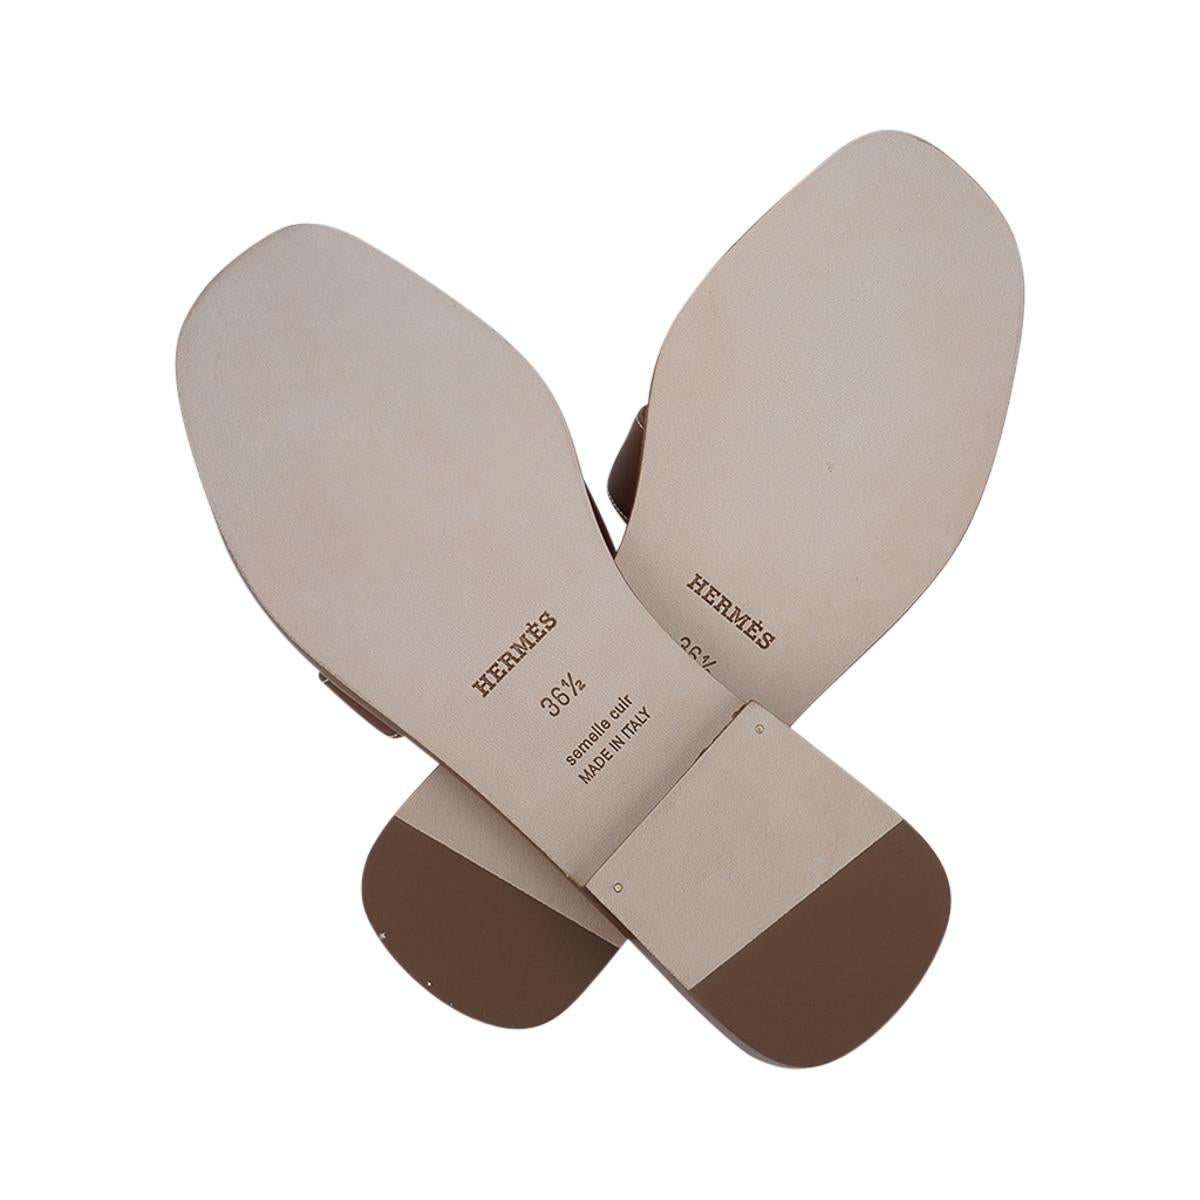 Hermes Sandal Flat Oran Etoupe Epsom 36.5 / 6.5 New w/ Box In New Condition For Sale In Miami, FL